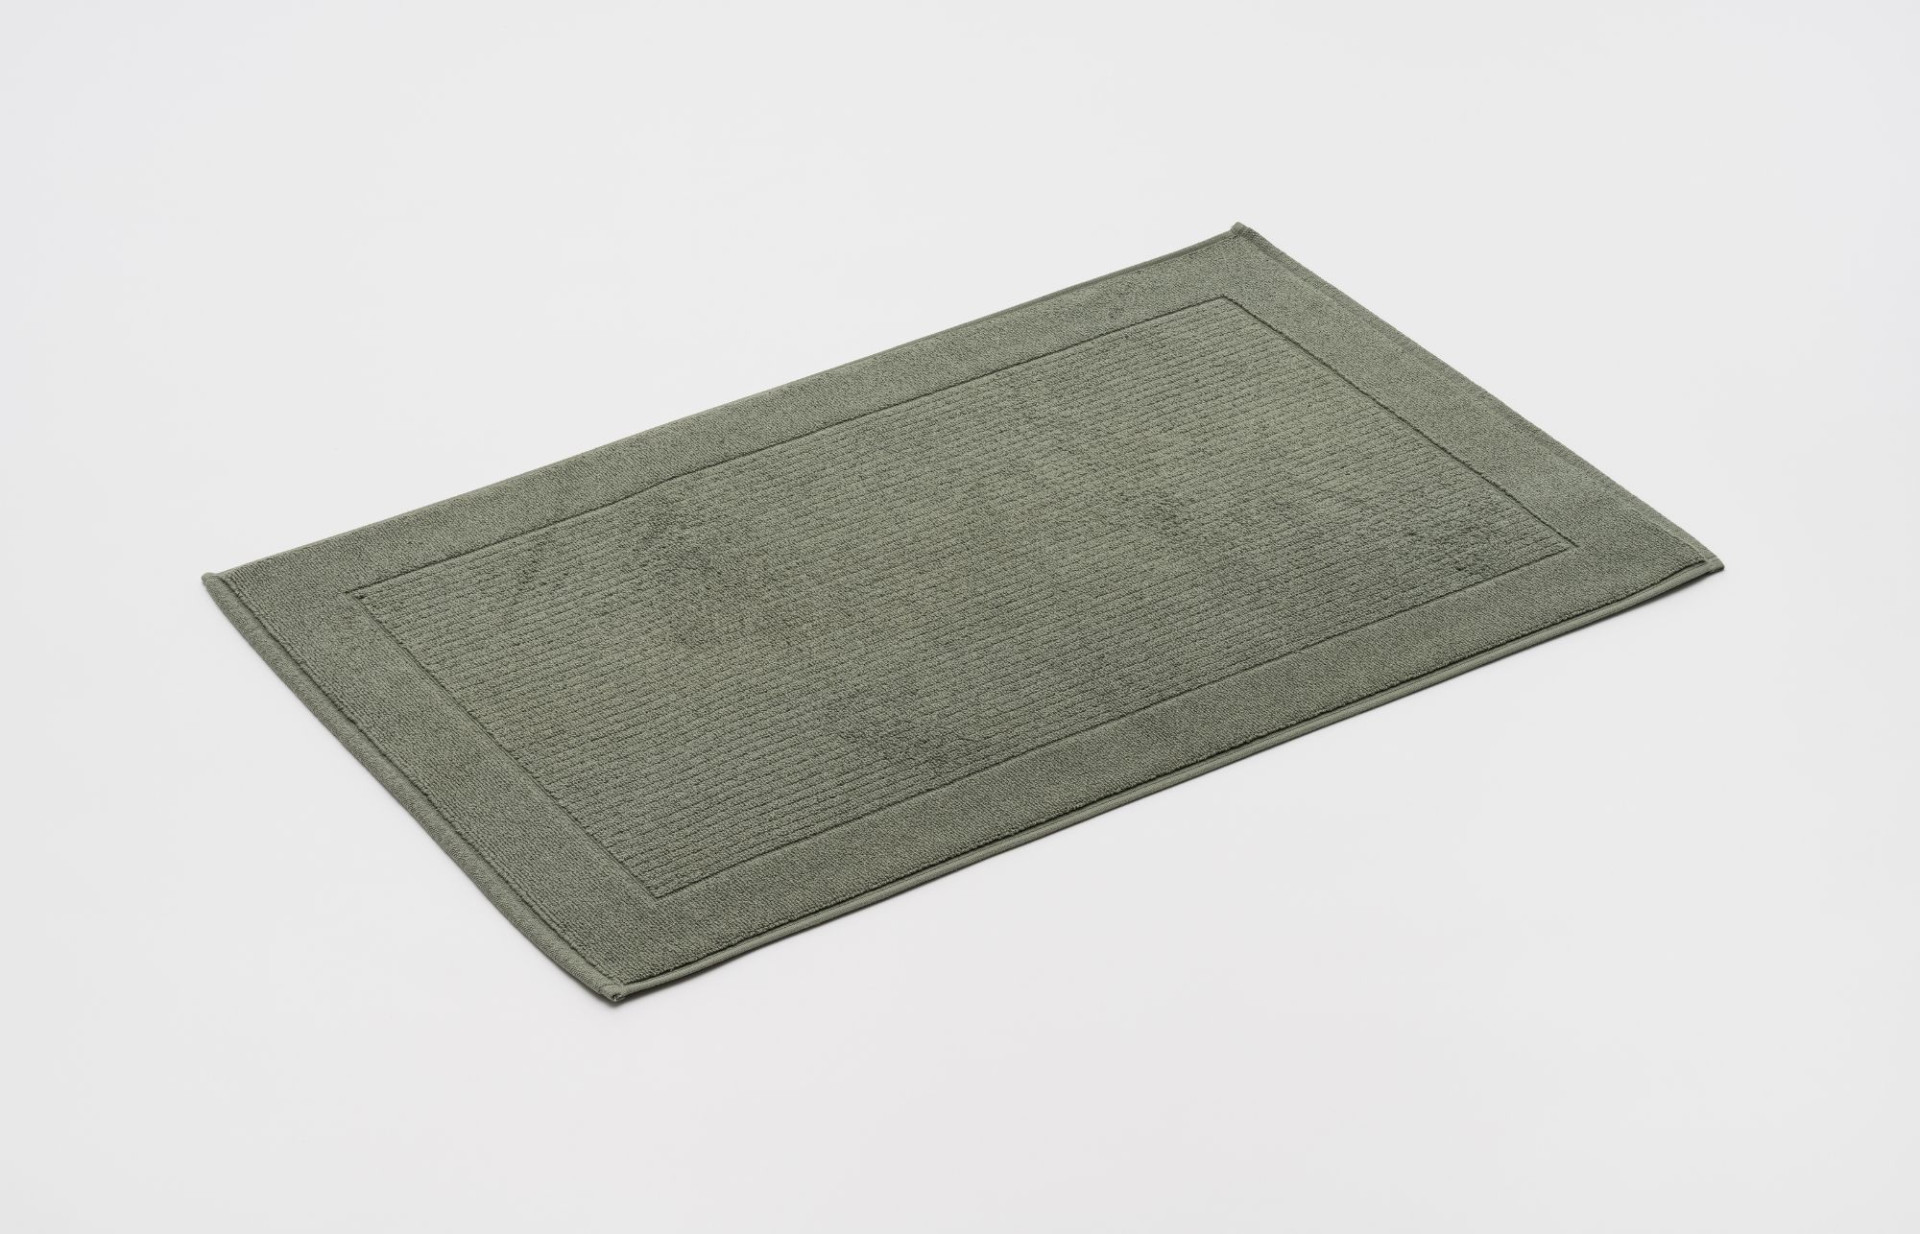 Step softly into 2023 with our luxury bath mat.